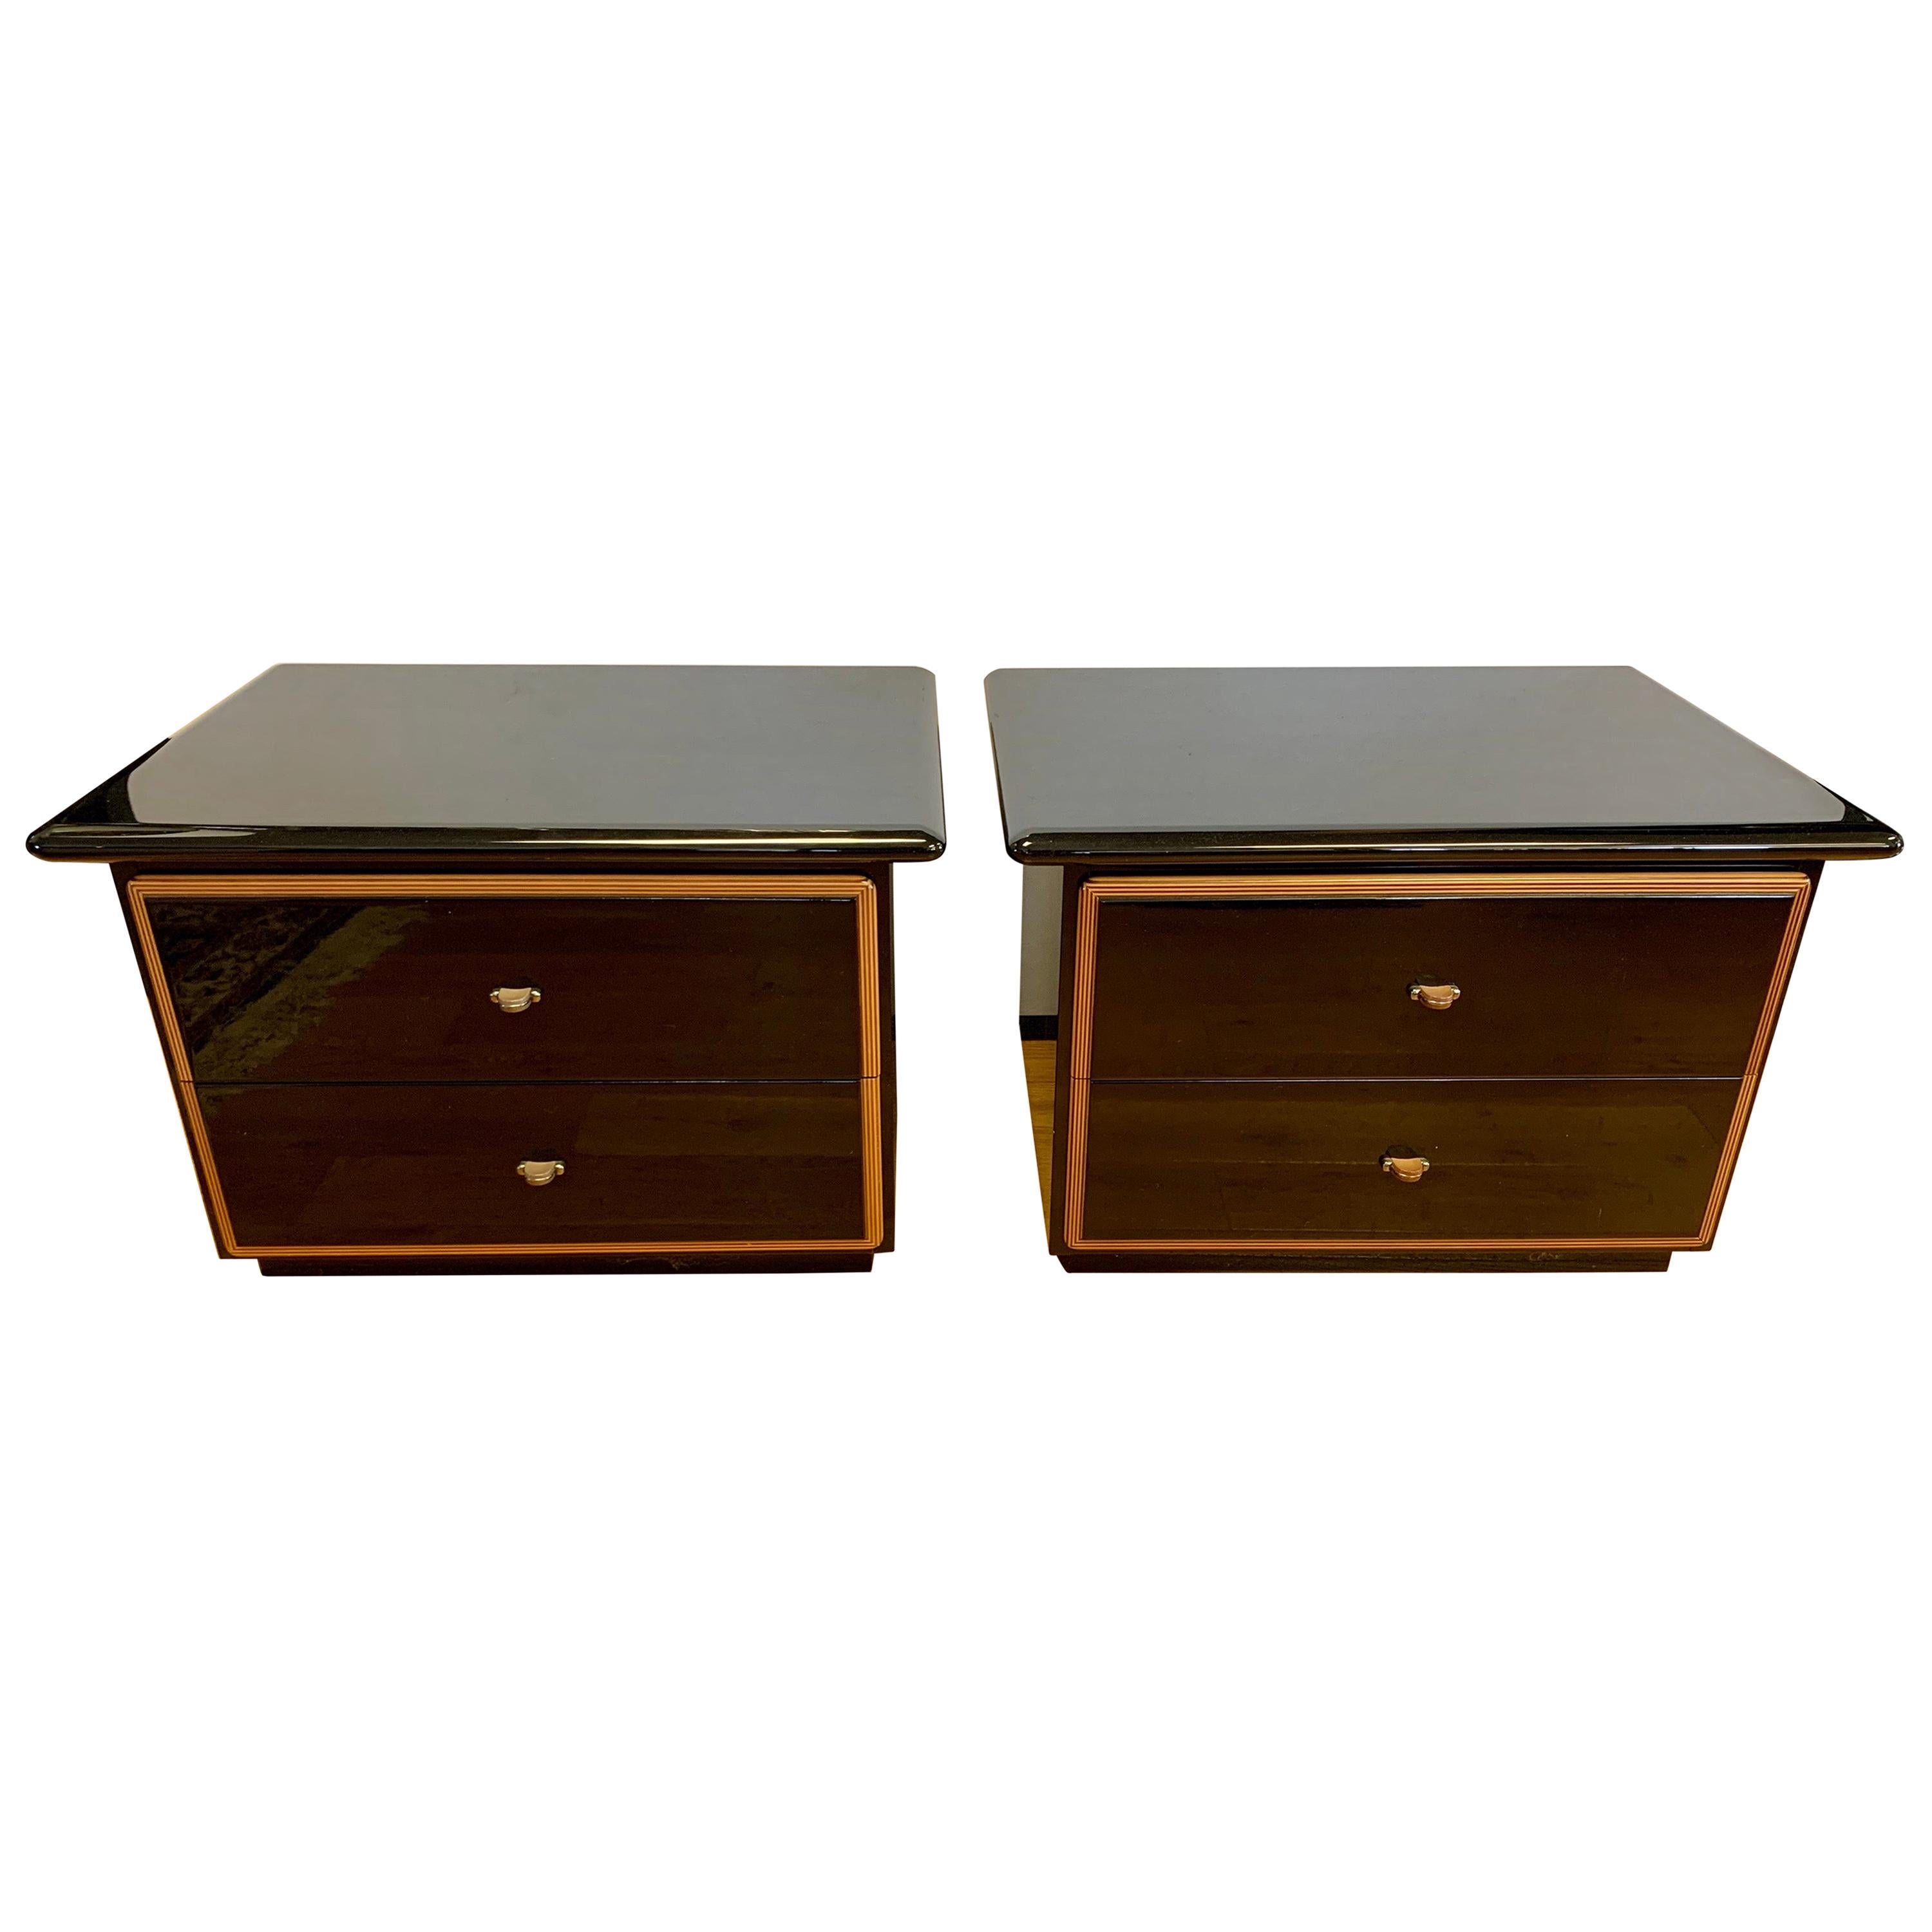 Roche Bobois Black Lacquer Nightstands, Pair Made in Italy Pierre Cardin